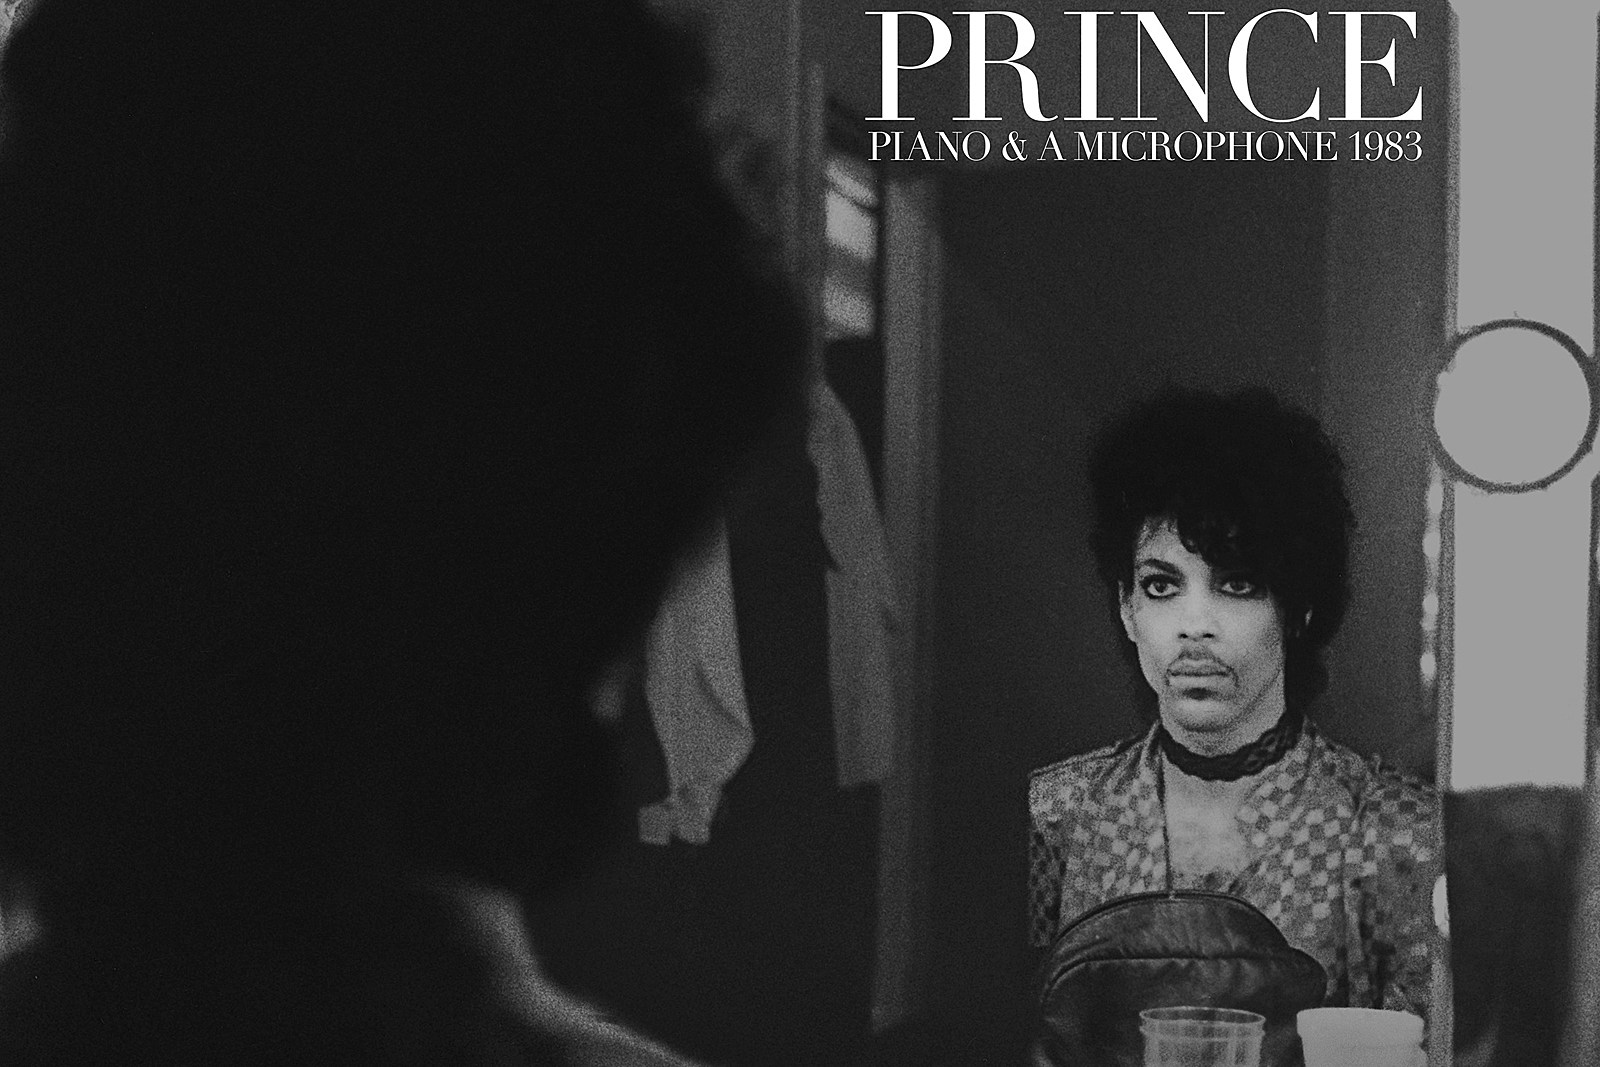 New Prince Album, 'Piano and a Microphone 1983,' Announced